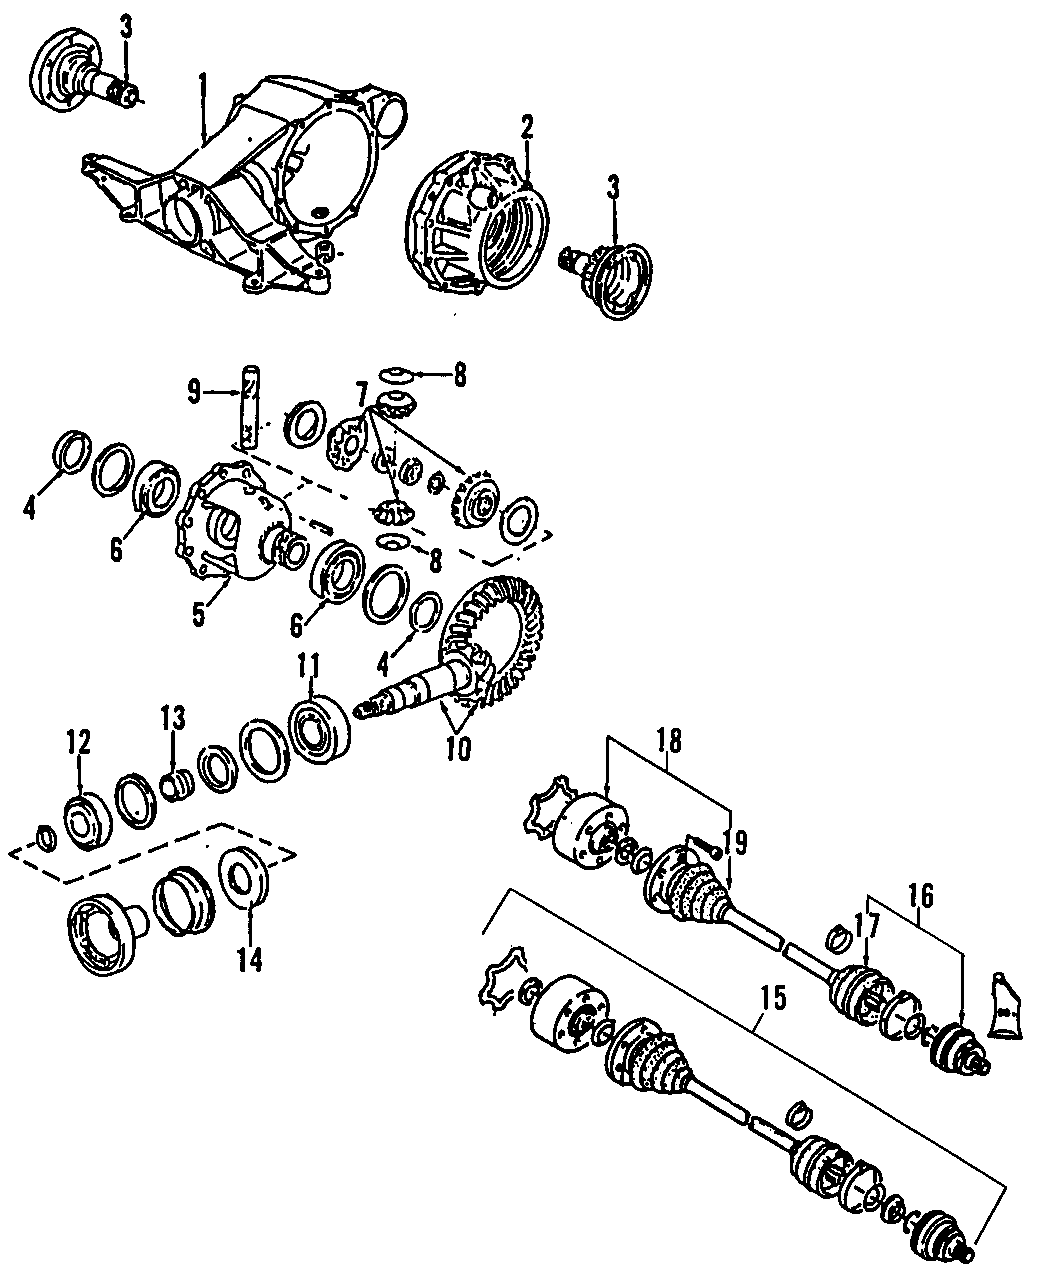 2DRIVE AXLES. REAR AXLE. AXLE SHAFTS & JOINTS. DIFFERENTIAL. PROPELLER SHAFT.https://images.simplepart.com/images/parts/motor/fullsize/F257120.png